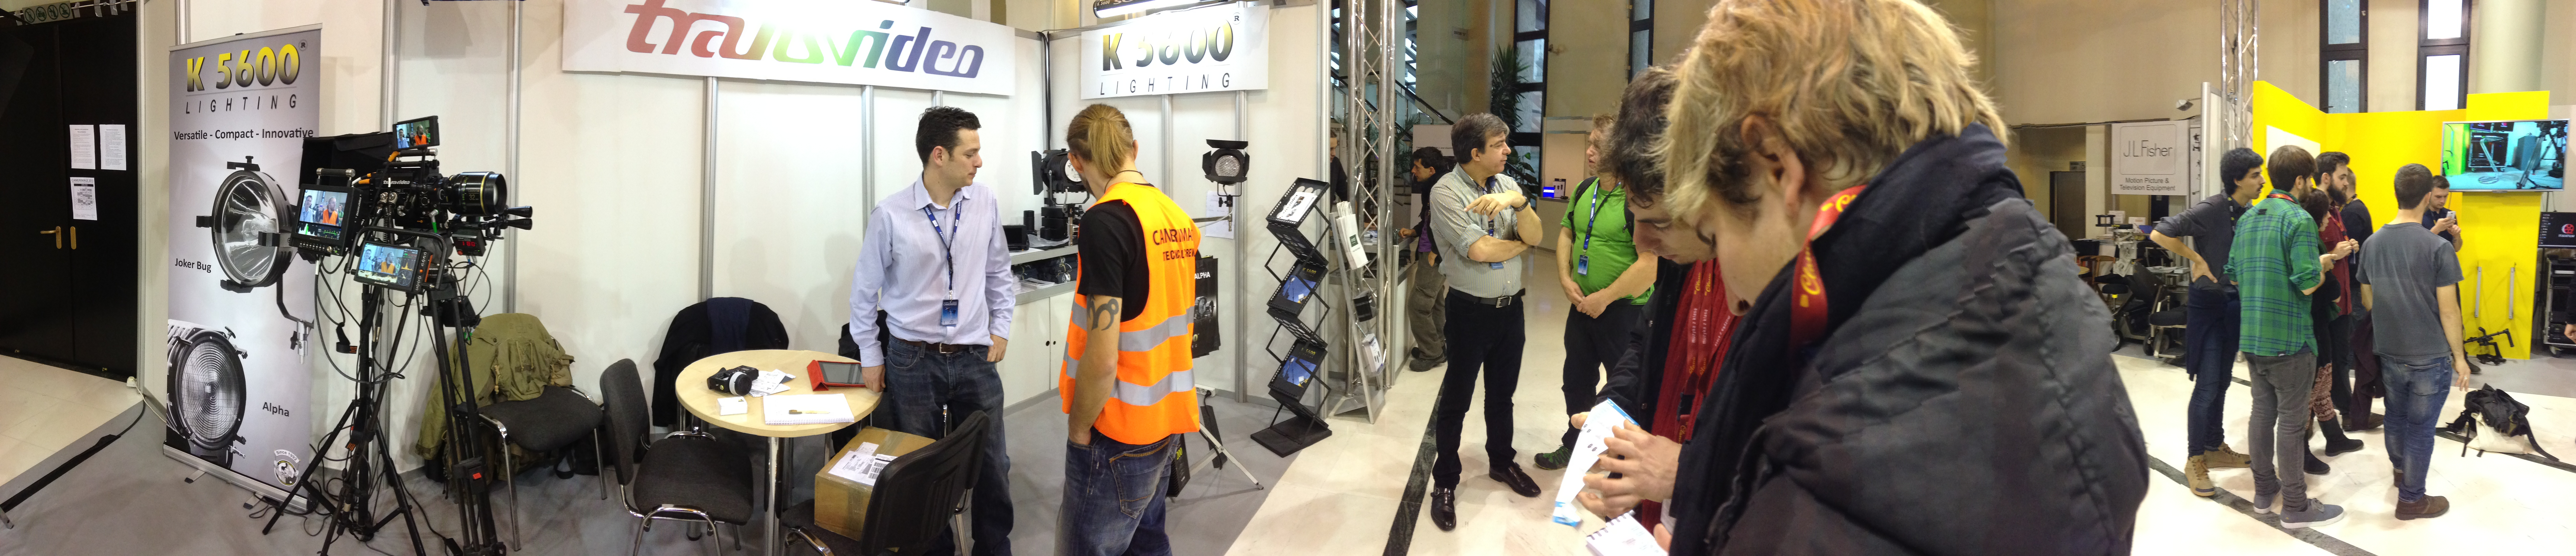 Transvideo K5600 booth at Camerimage